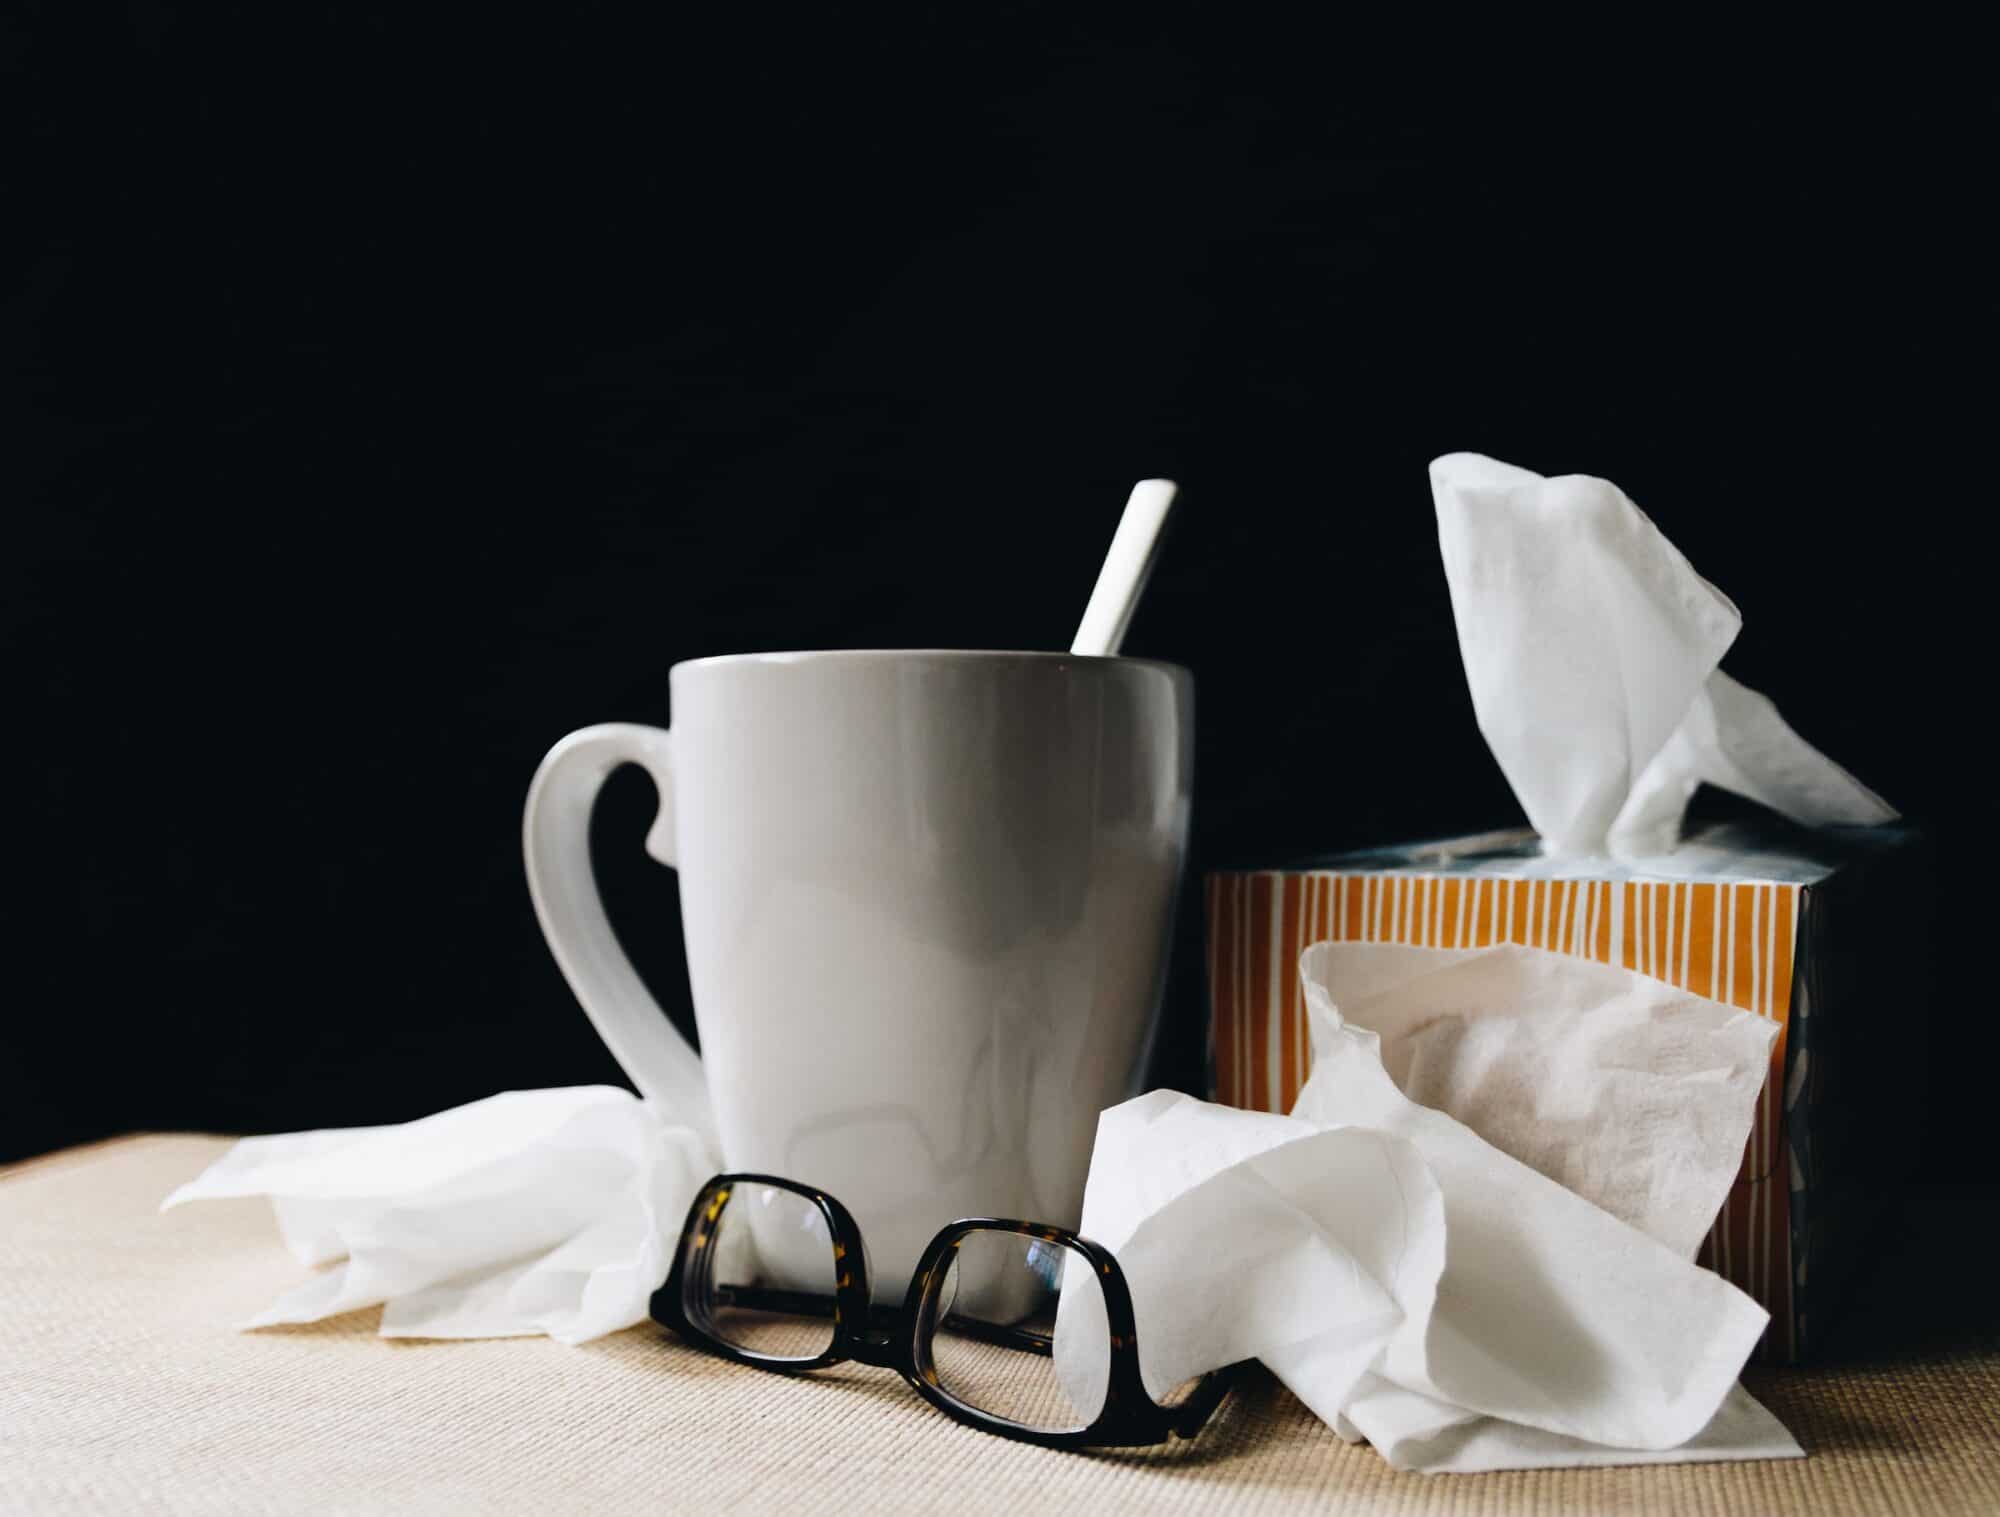 A mug of tea, used tissues, and a pair of glasses.